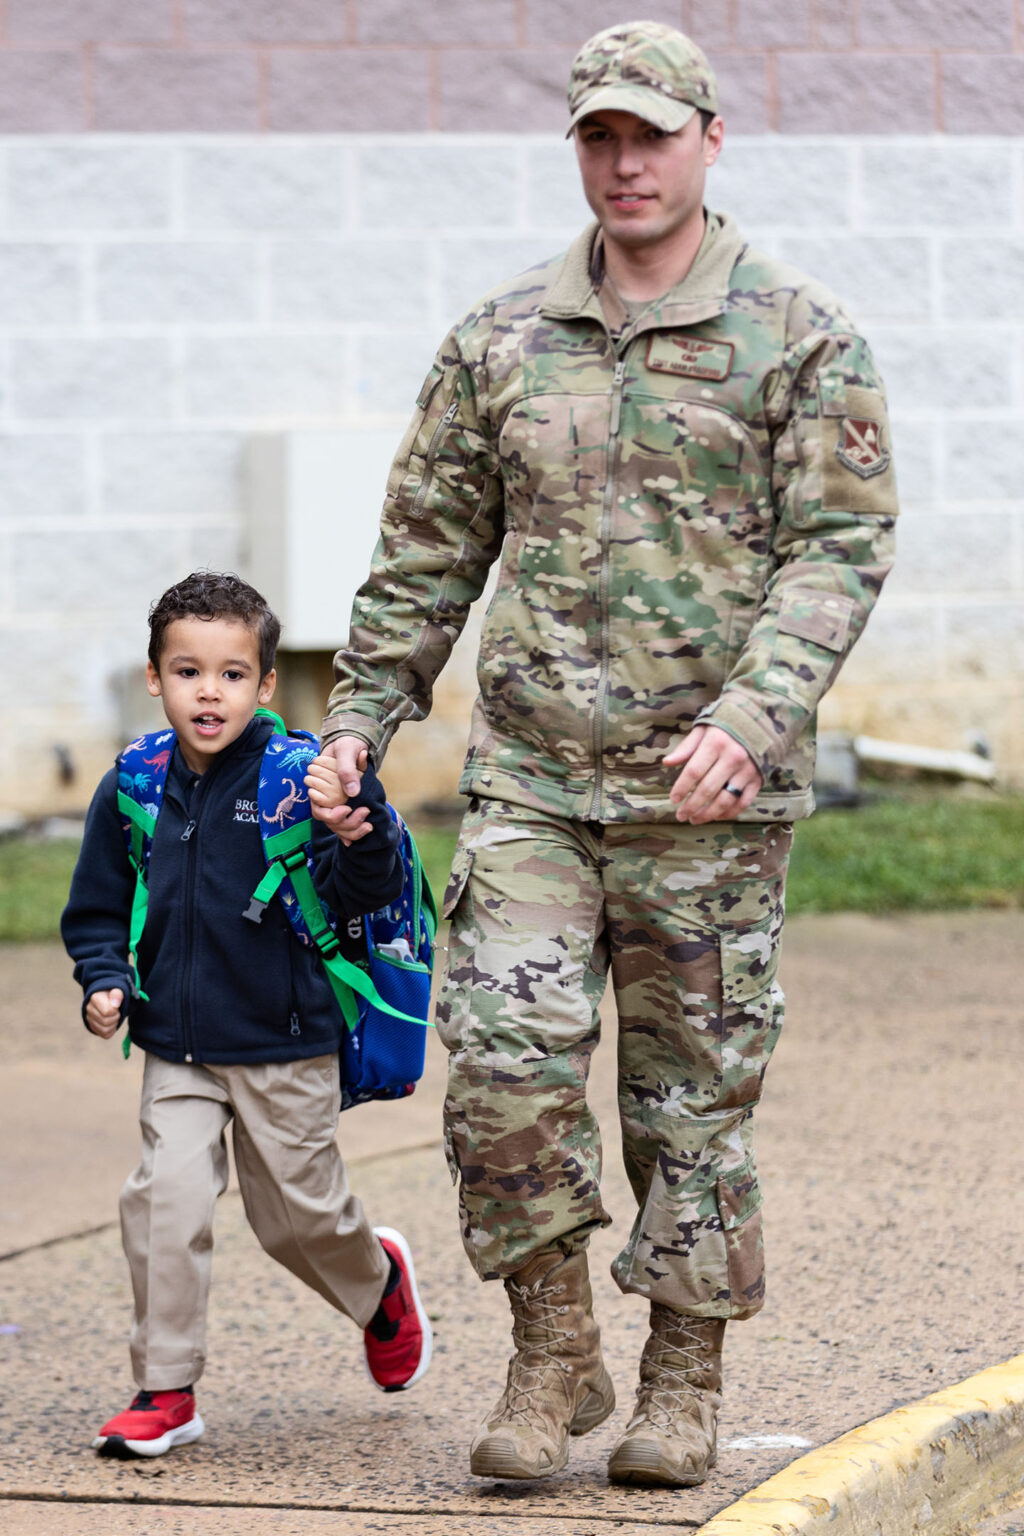 Proud military dad dropping his son off at morning arrival